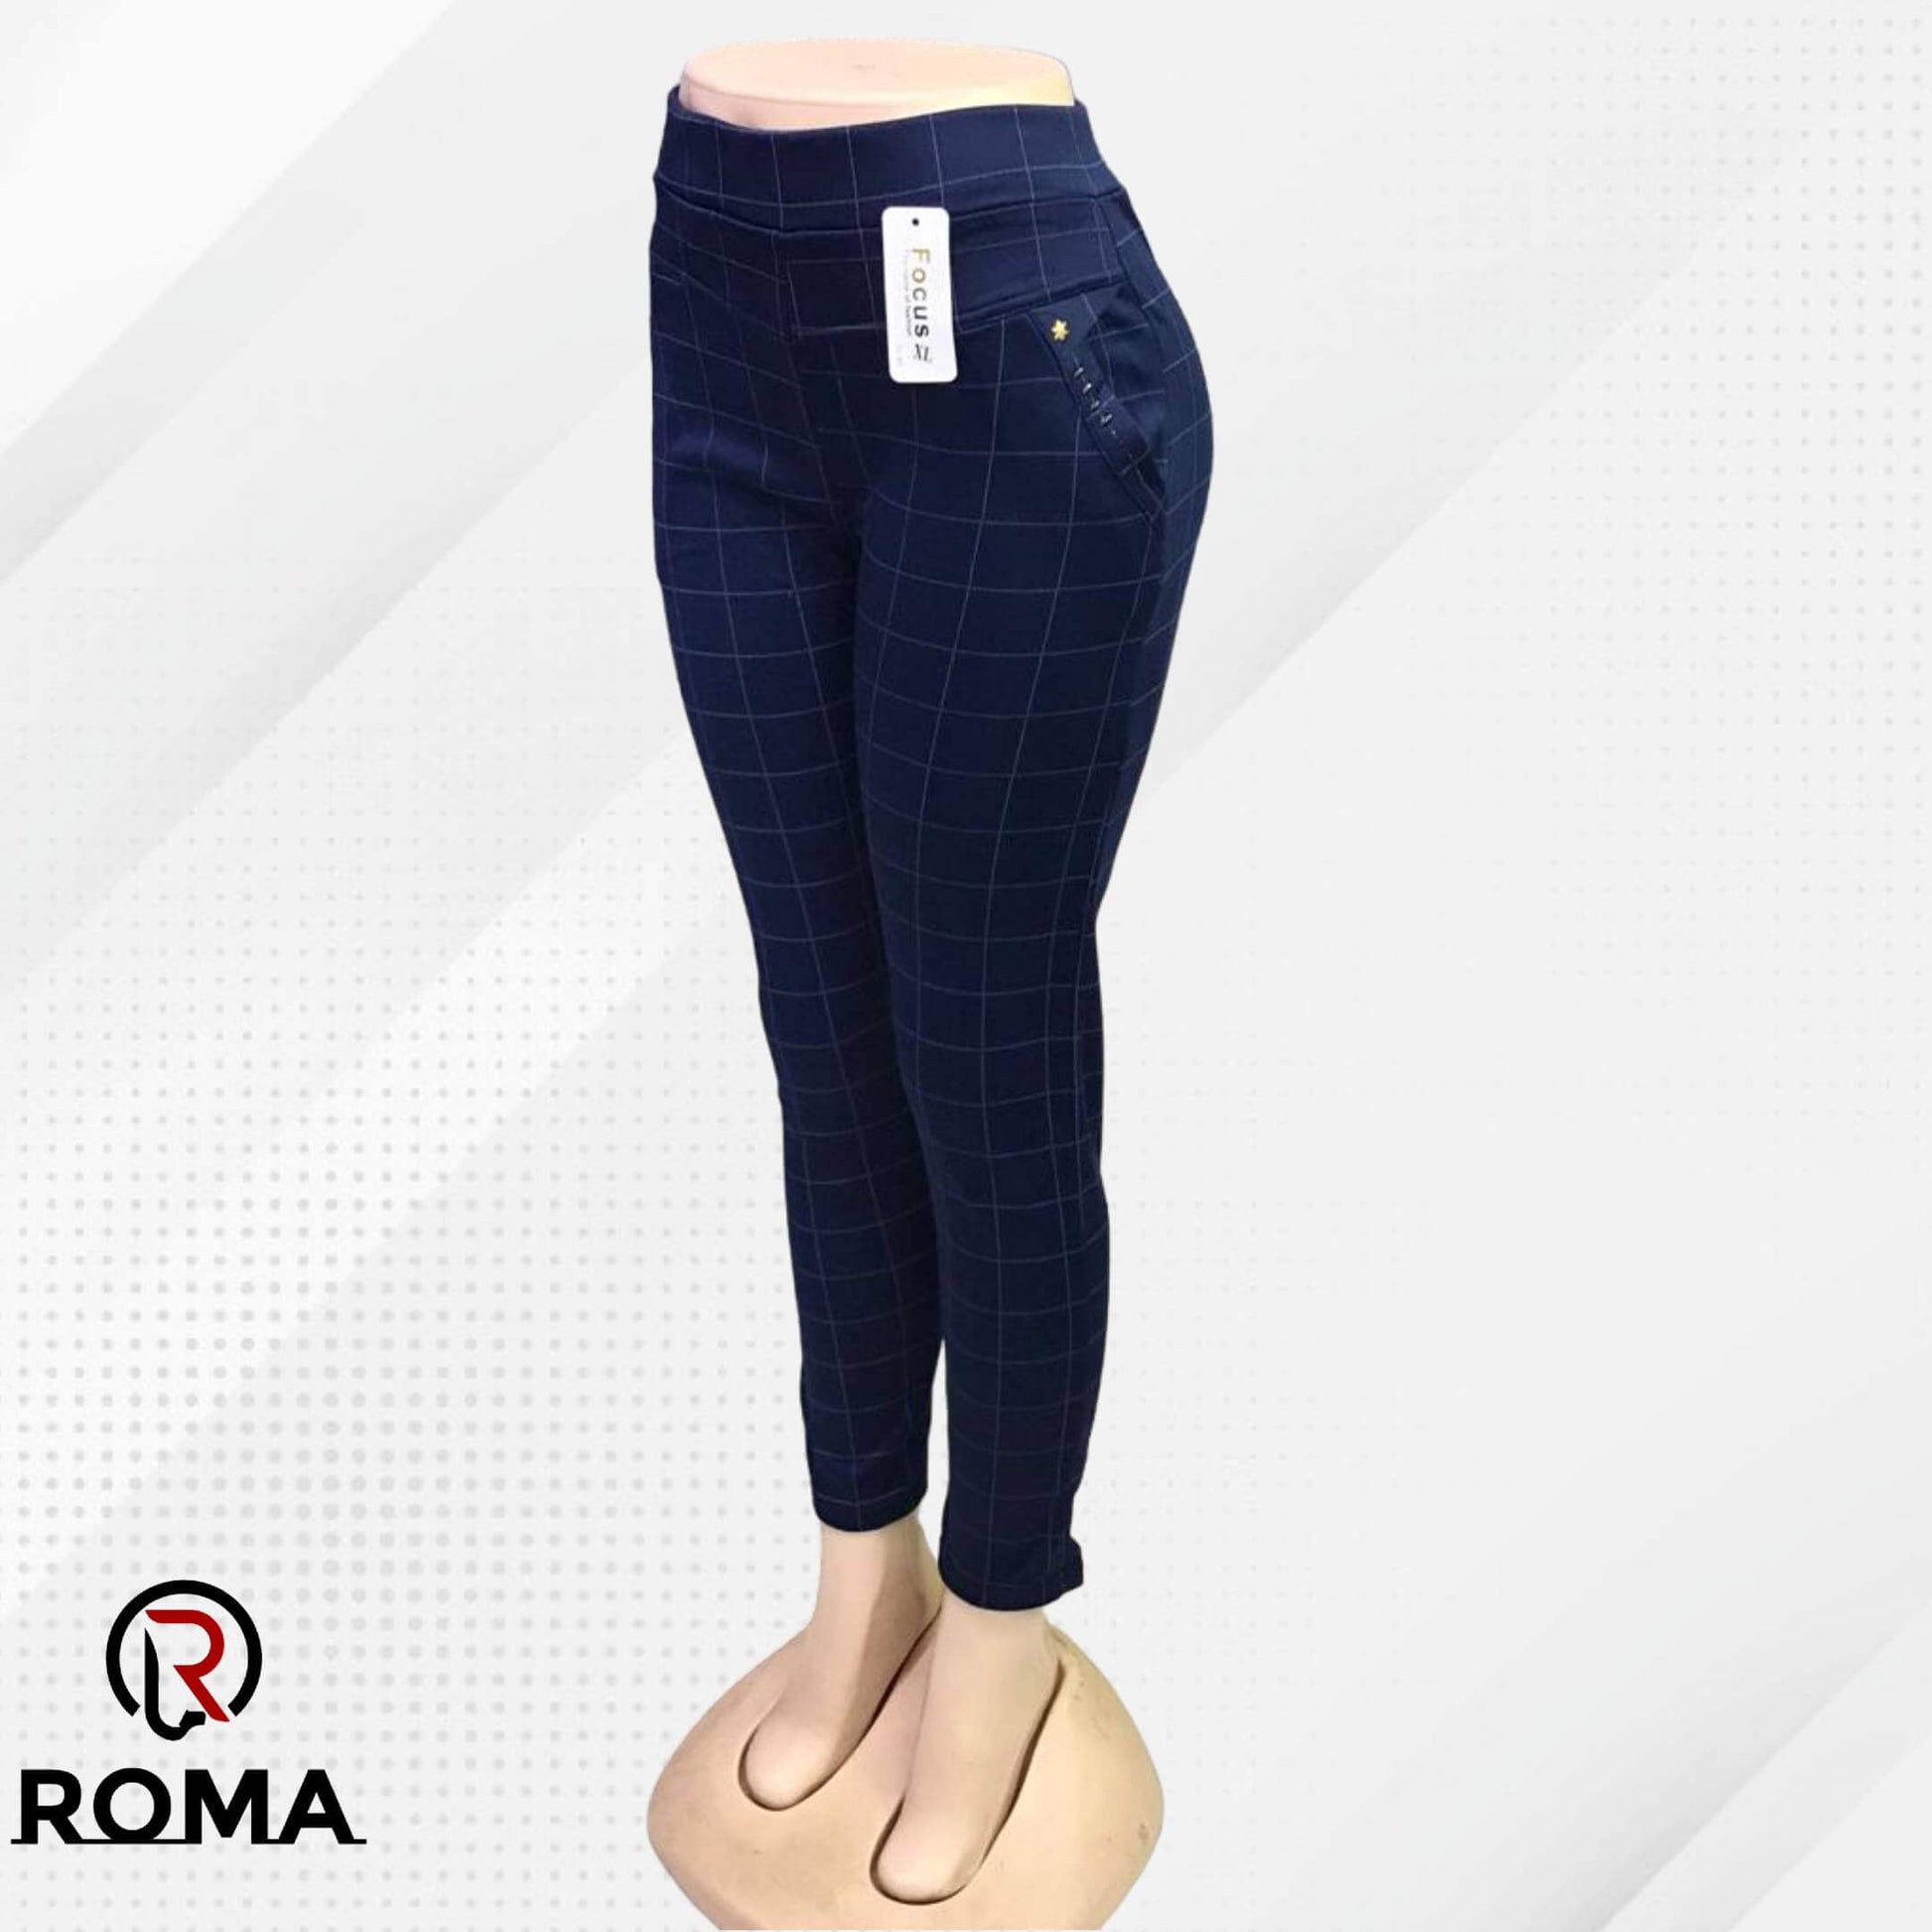 Stretchable Stylish Jeggings for Women - ROMA Store